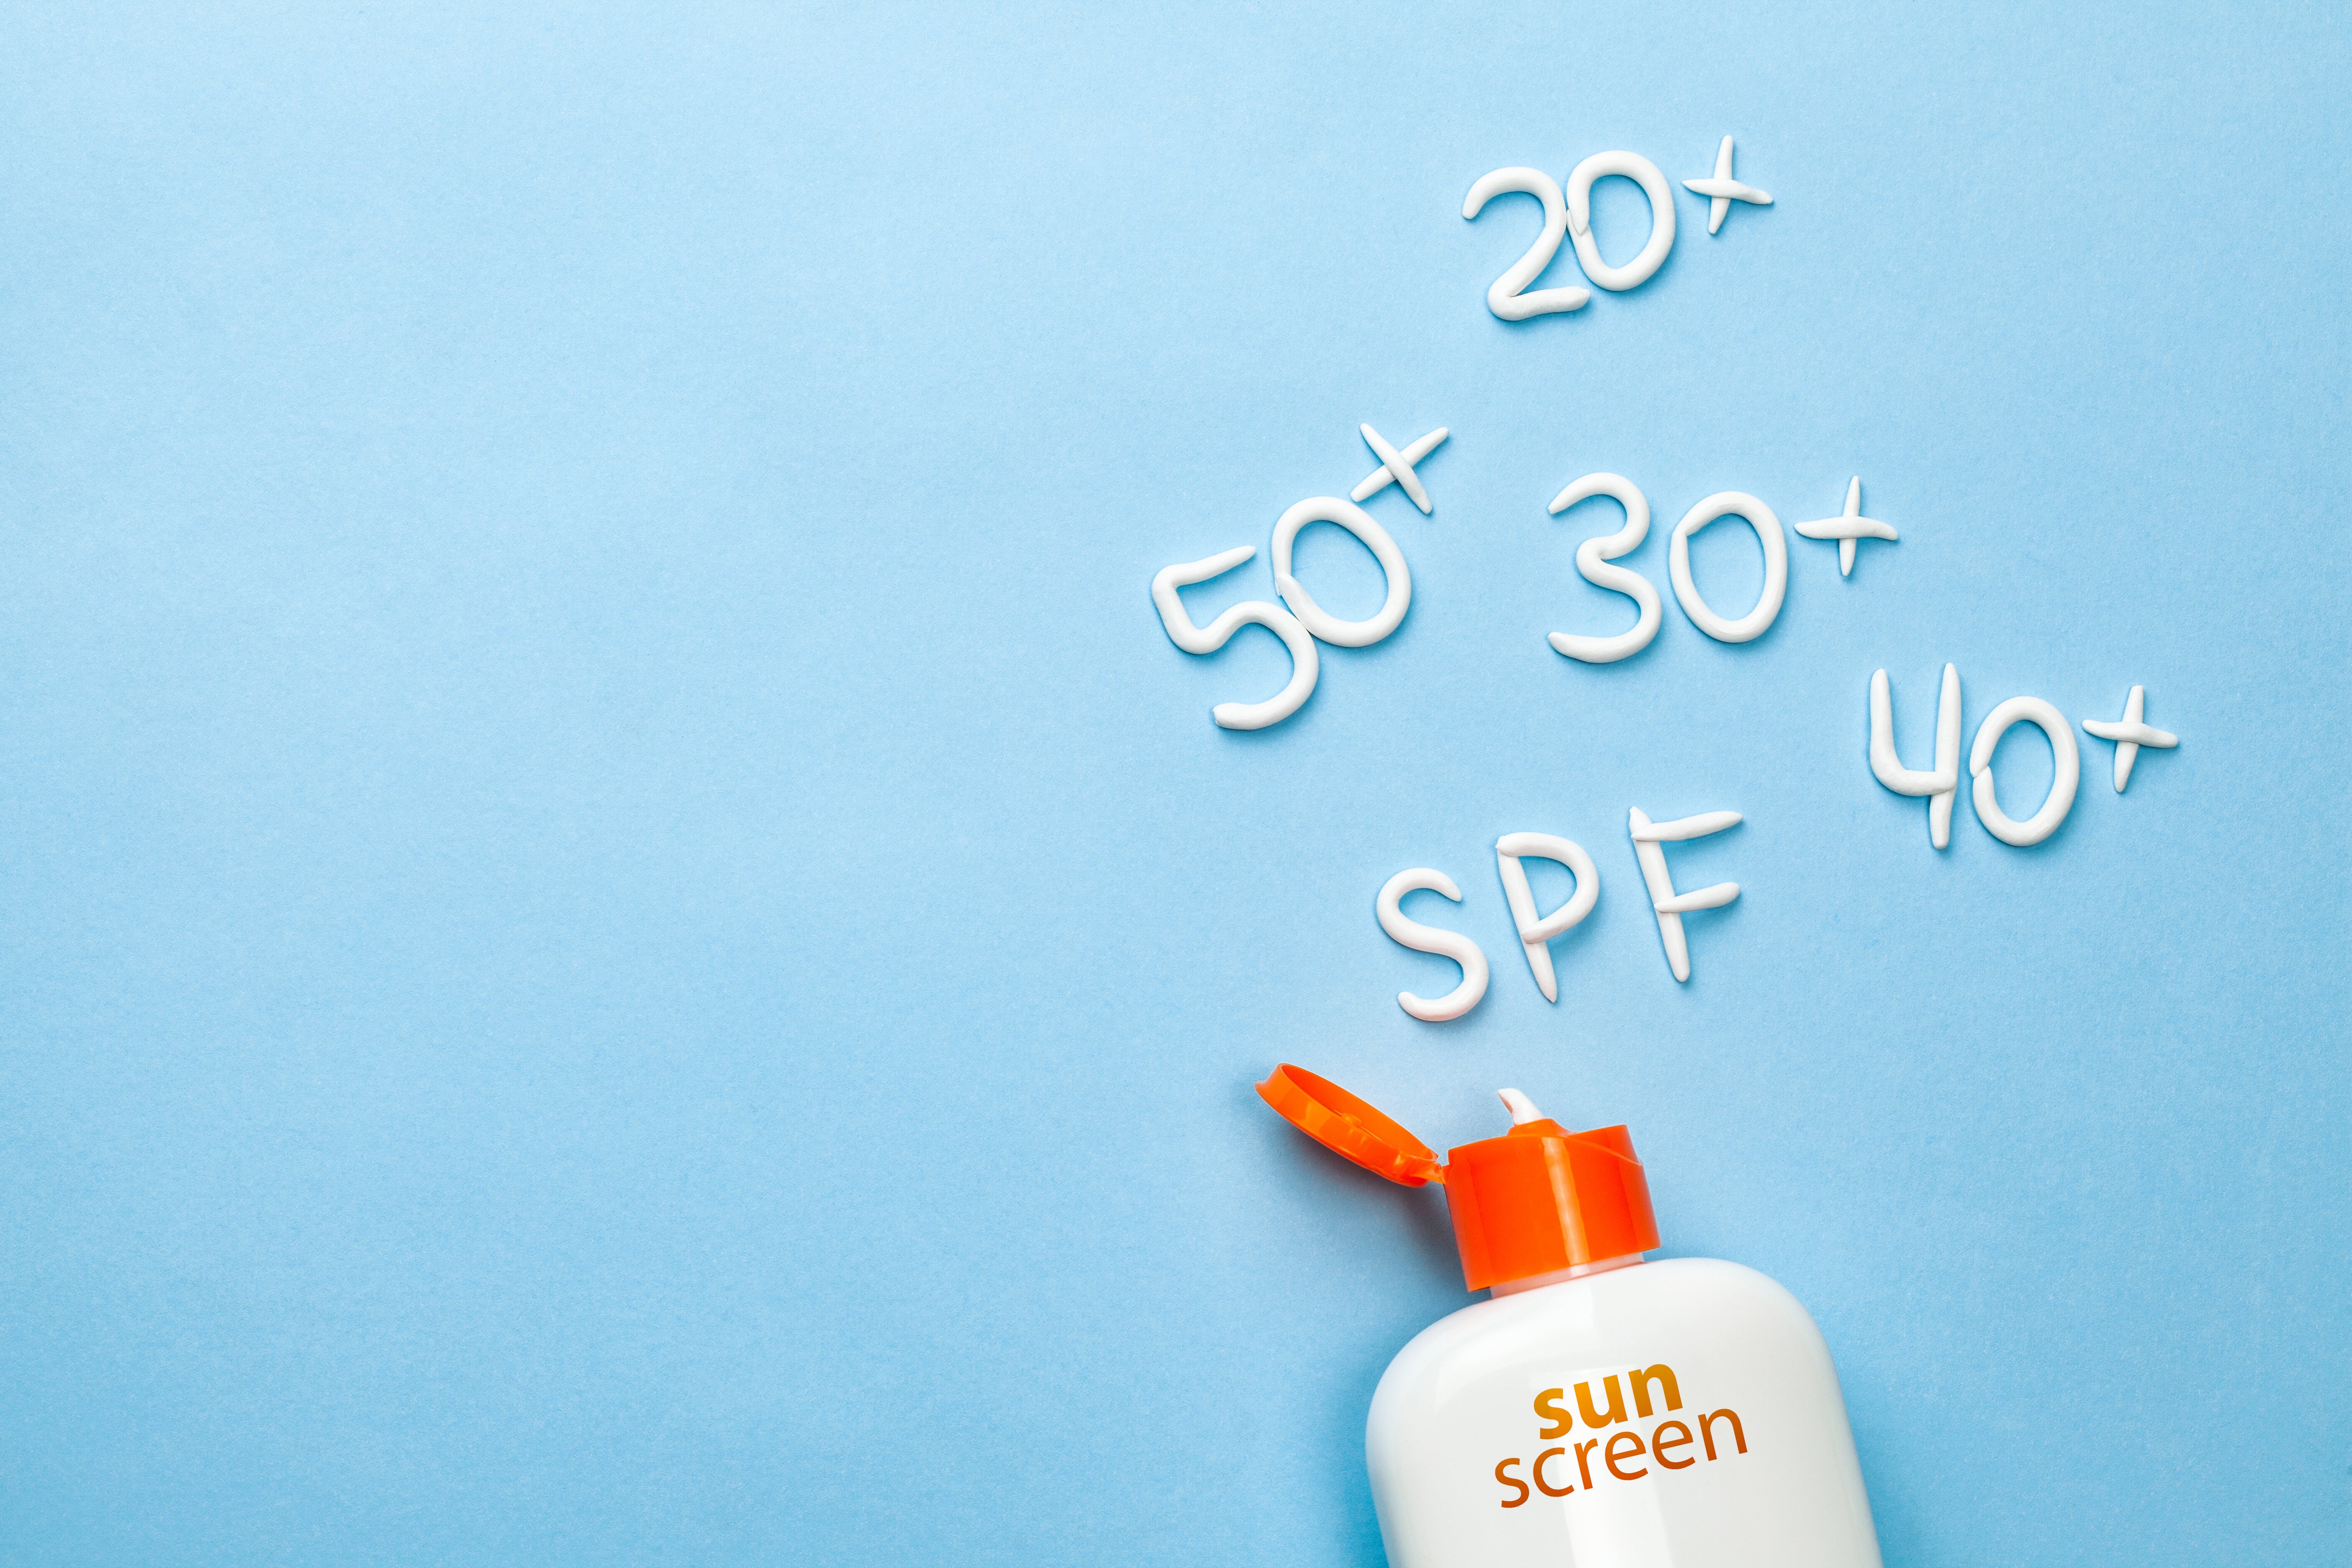 Does a higher SPF mean less application?